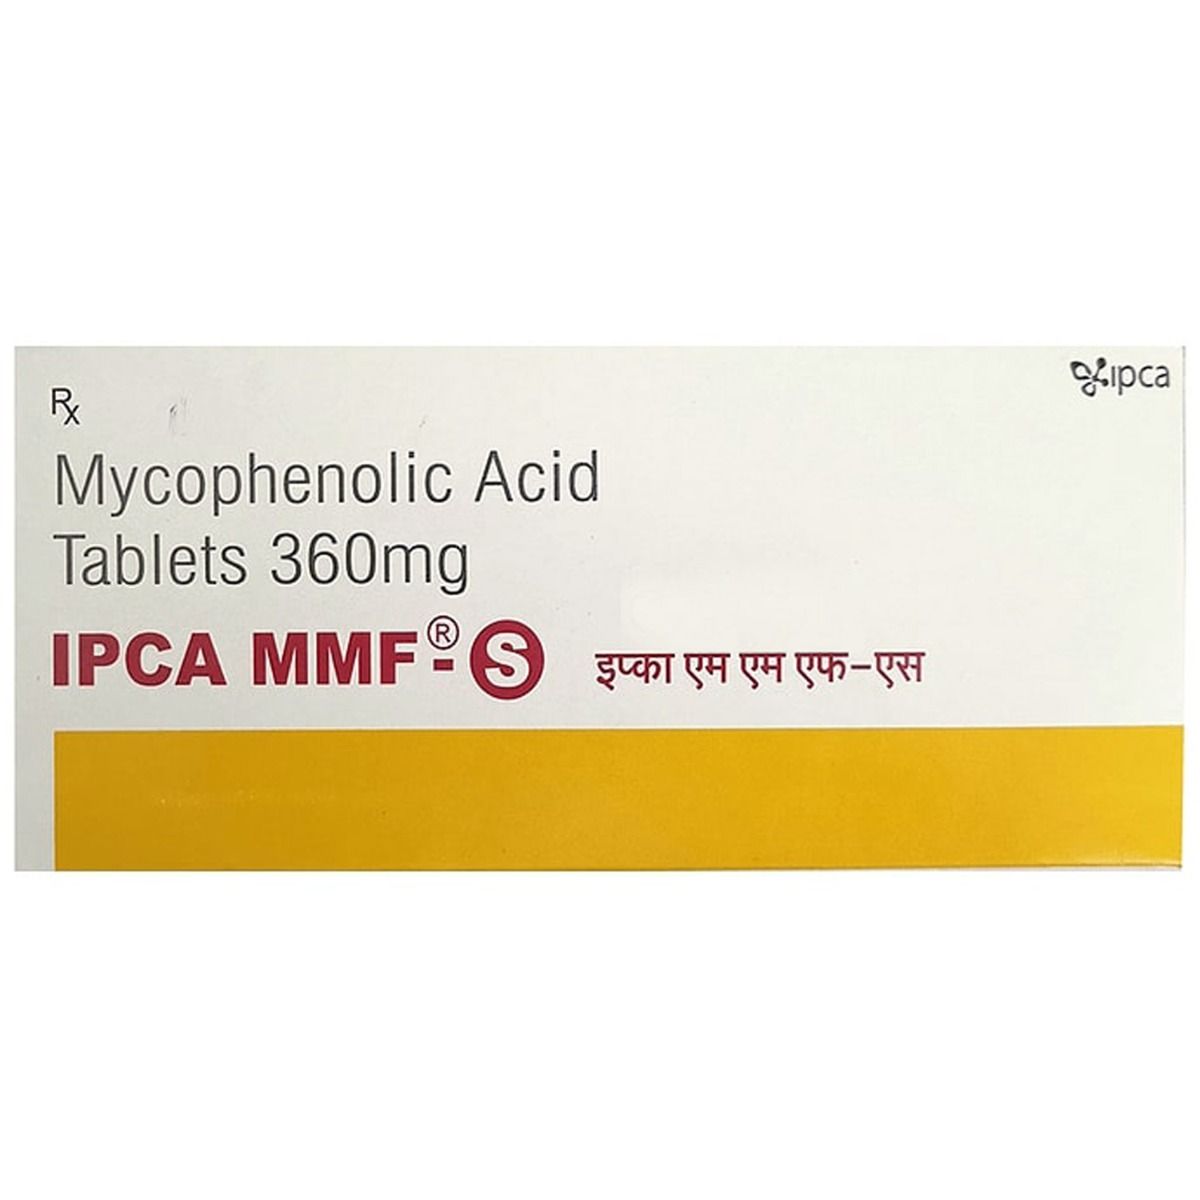 MMF-S Tablet 10's Price, Uses, Side Effects, Composition - Apollo ...